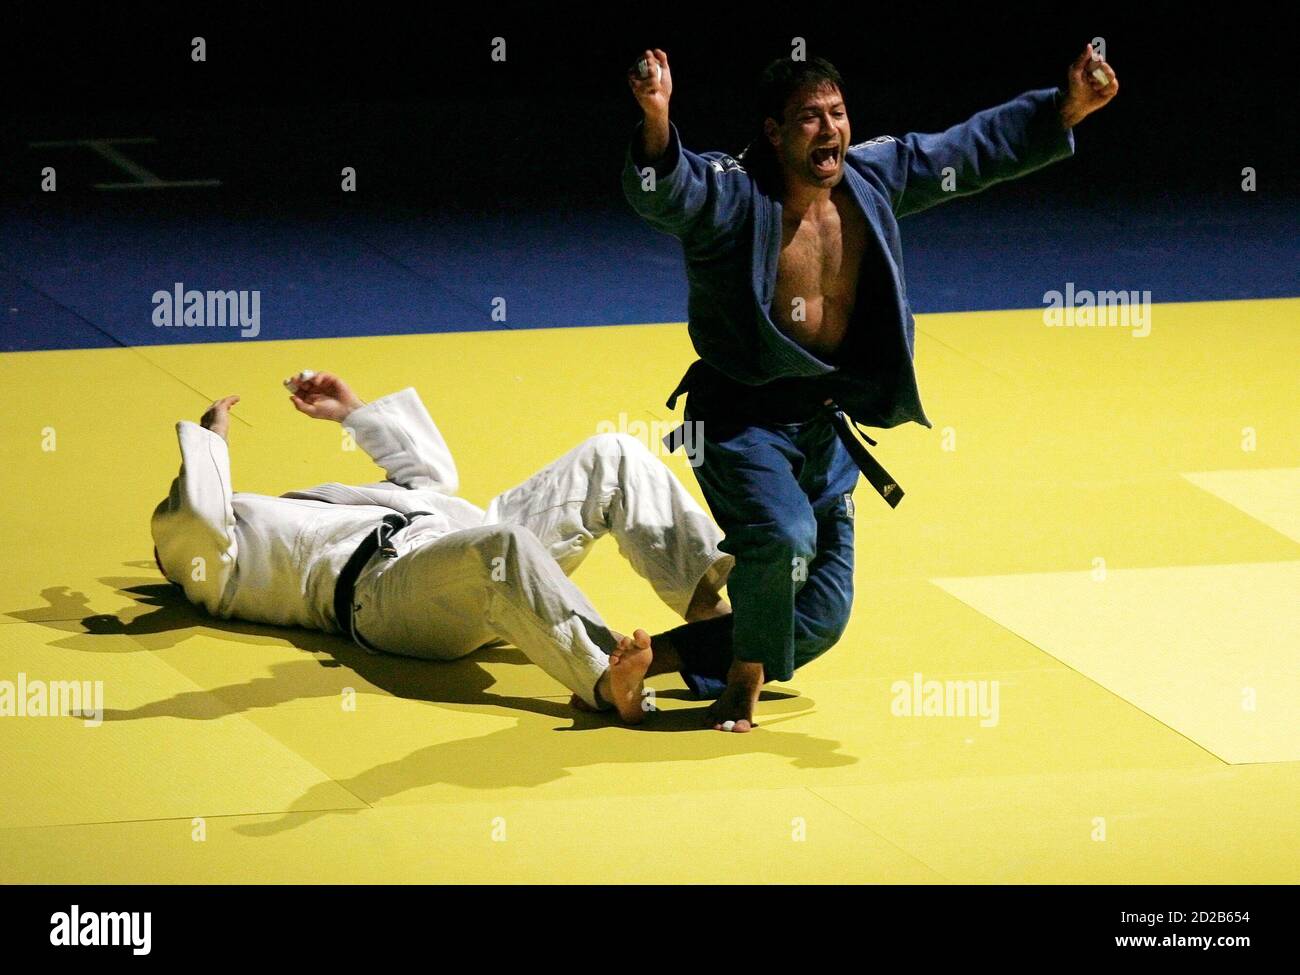 Israel's Ariel Zeevi (in blue) celebrates after winning -100 Kg bronze  medal of the European Judo Championship against France's Cristophe Humbert  in Lisbon April 13, 2008. REUTERS/Nacho Doce (PORTUGAL Stock Photo - Alamy